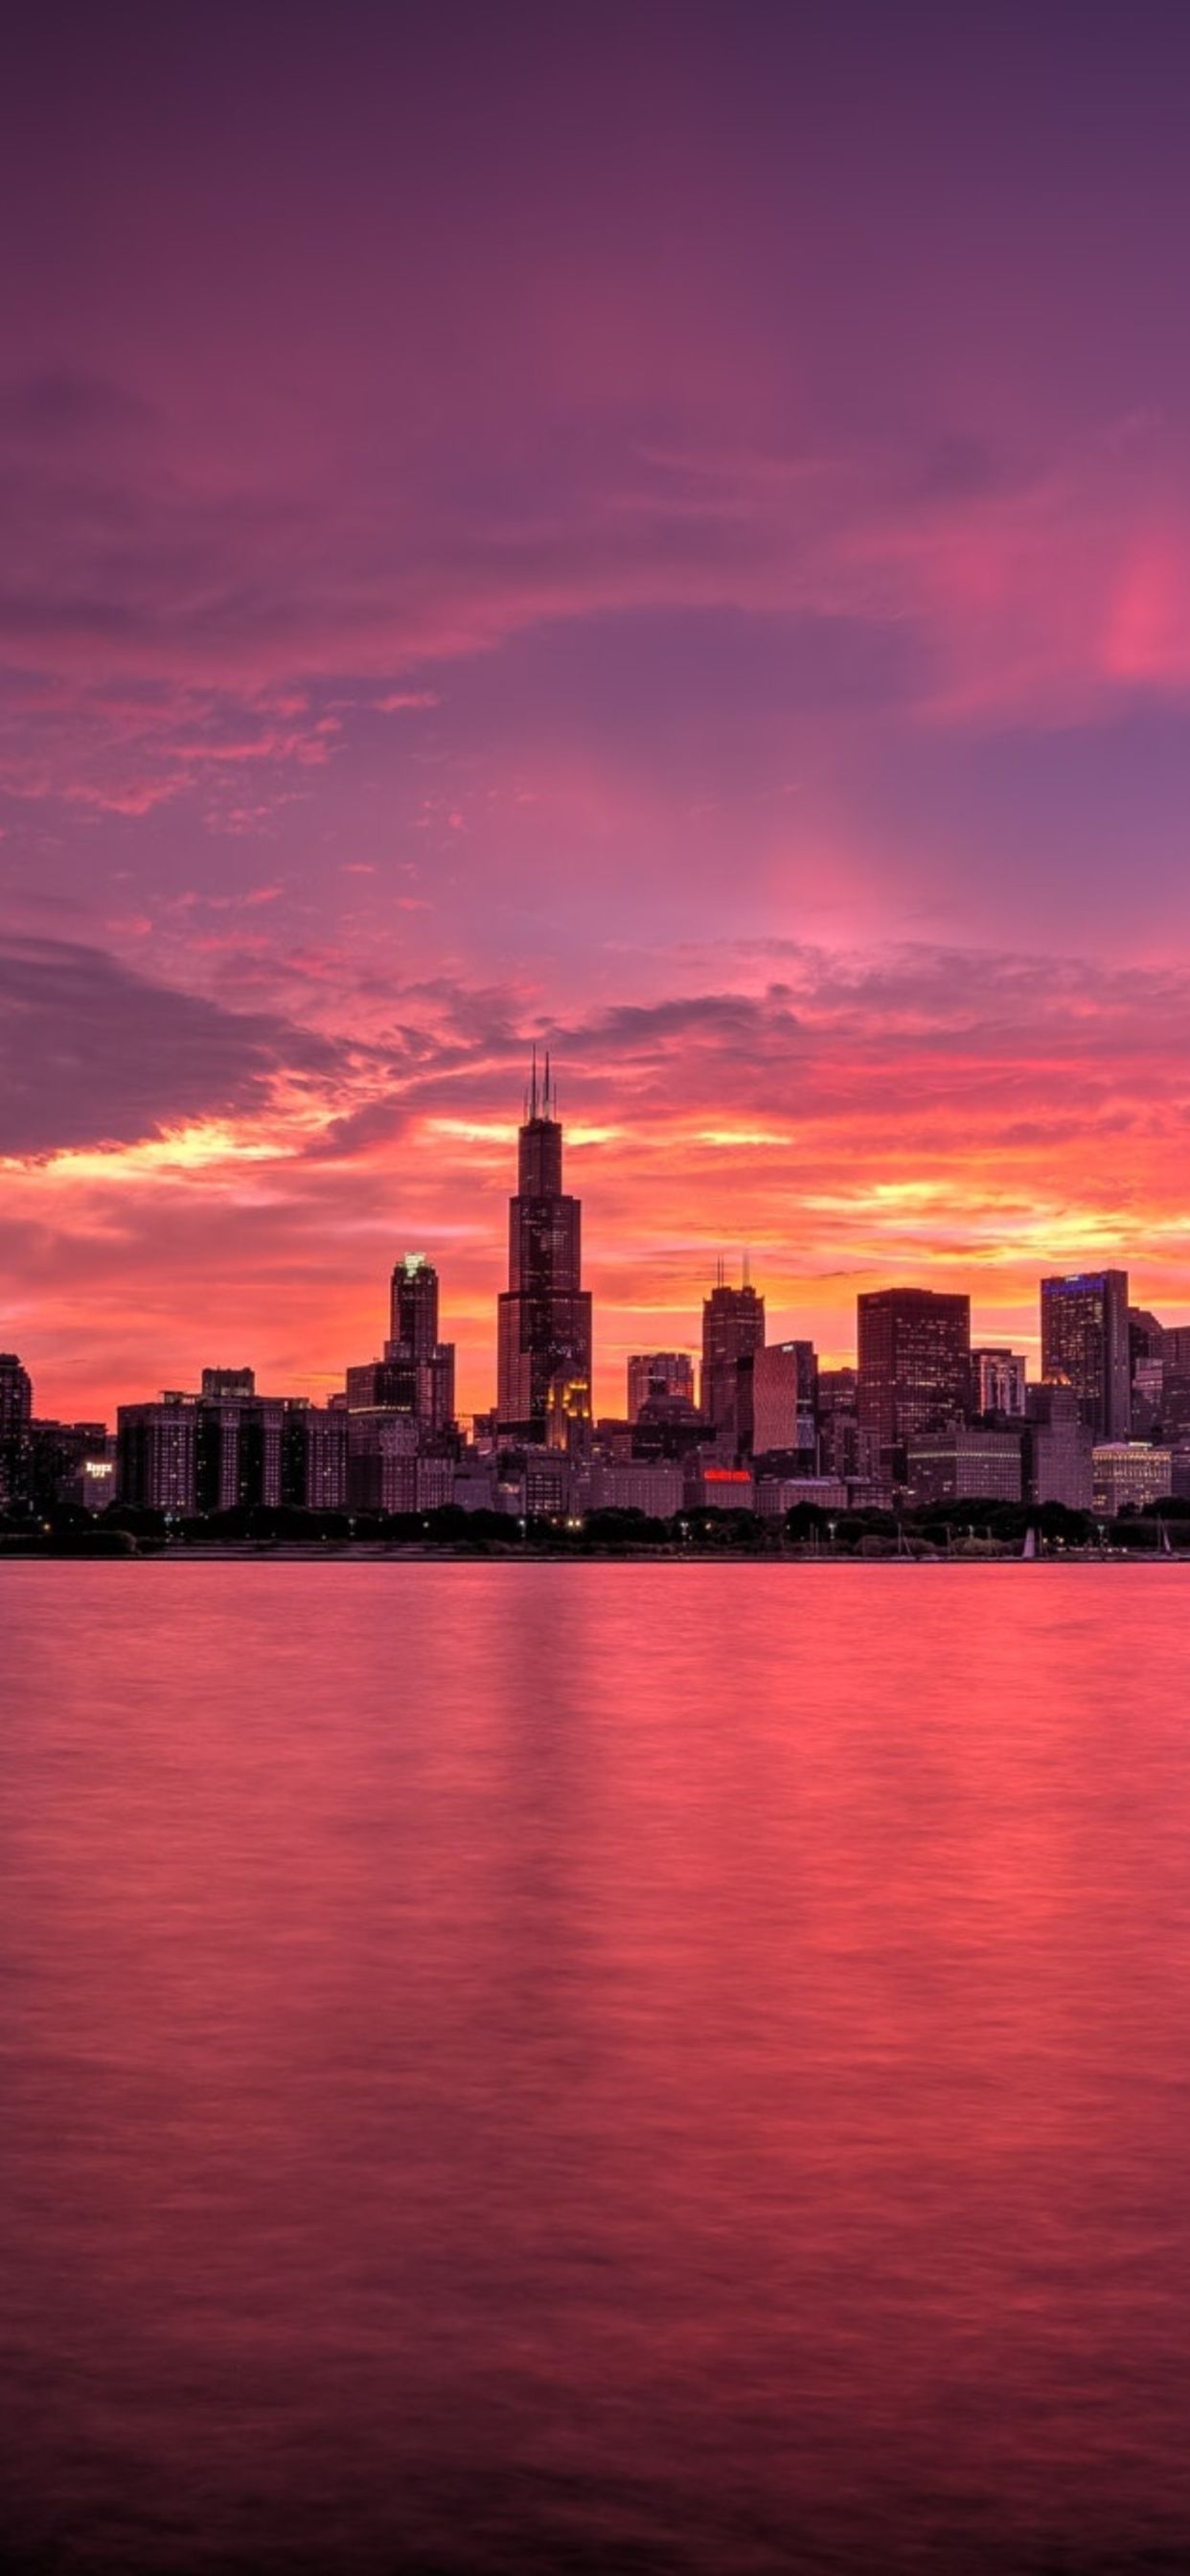 A city skyline is seen at sunset - Sunrise, Chicago